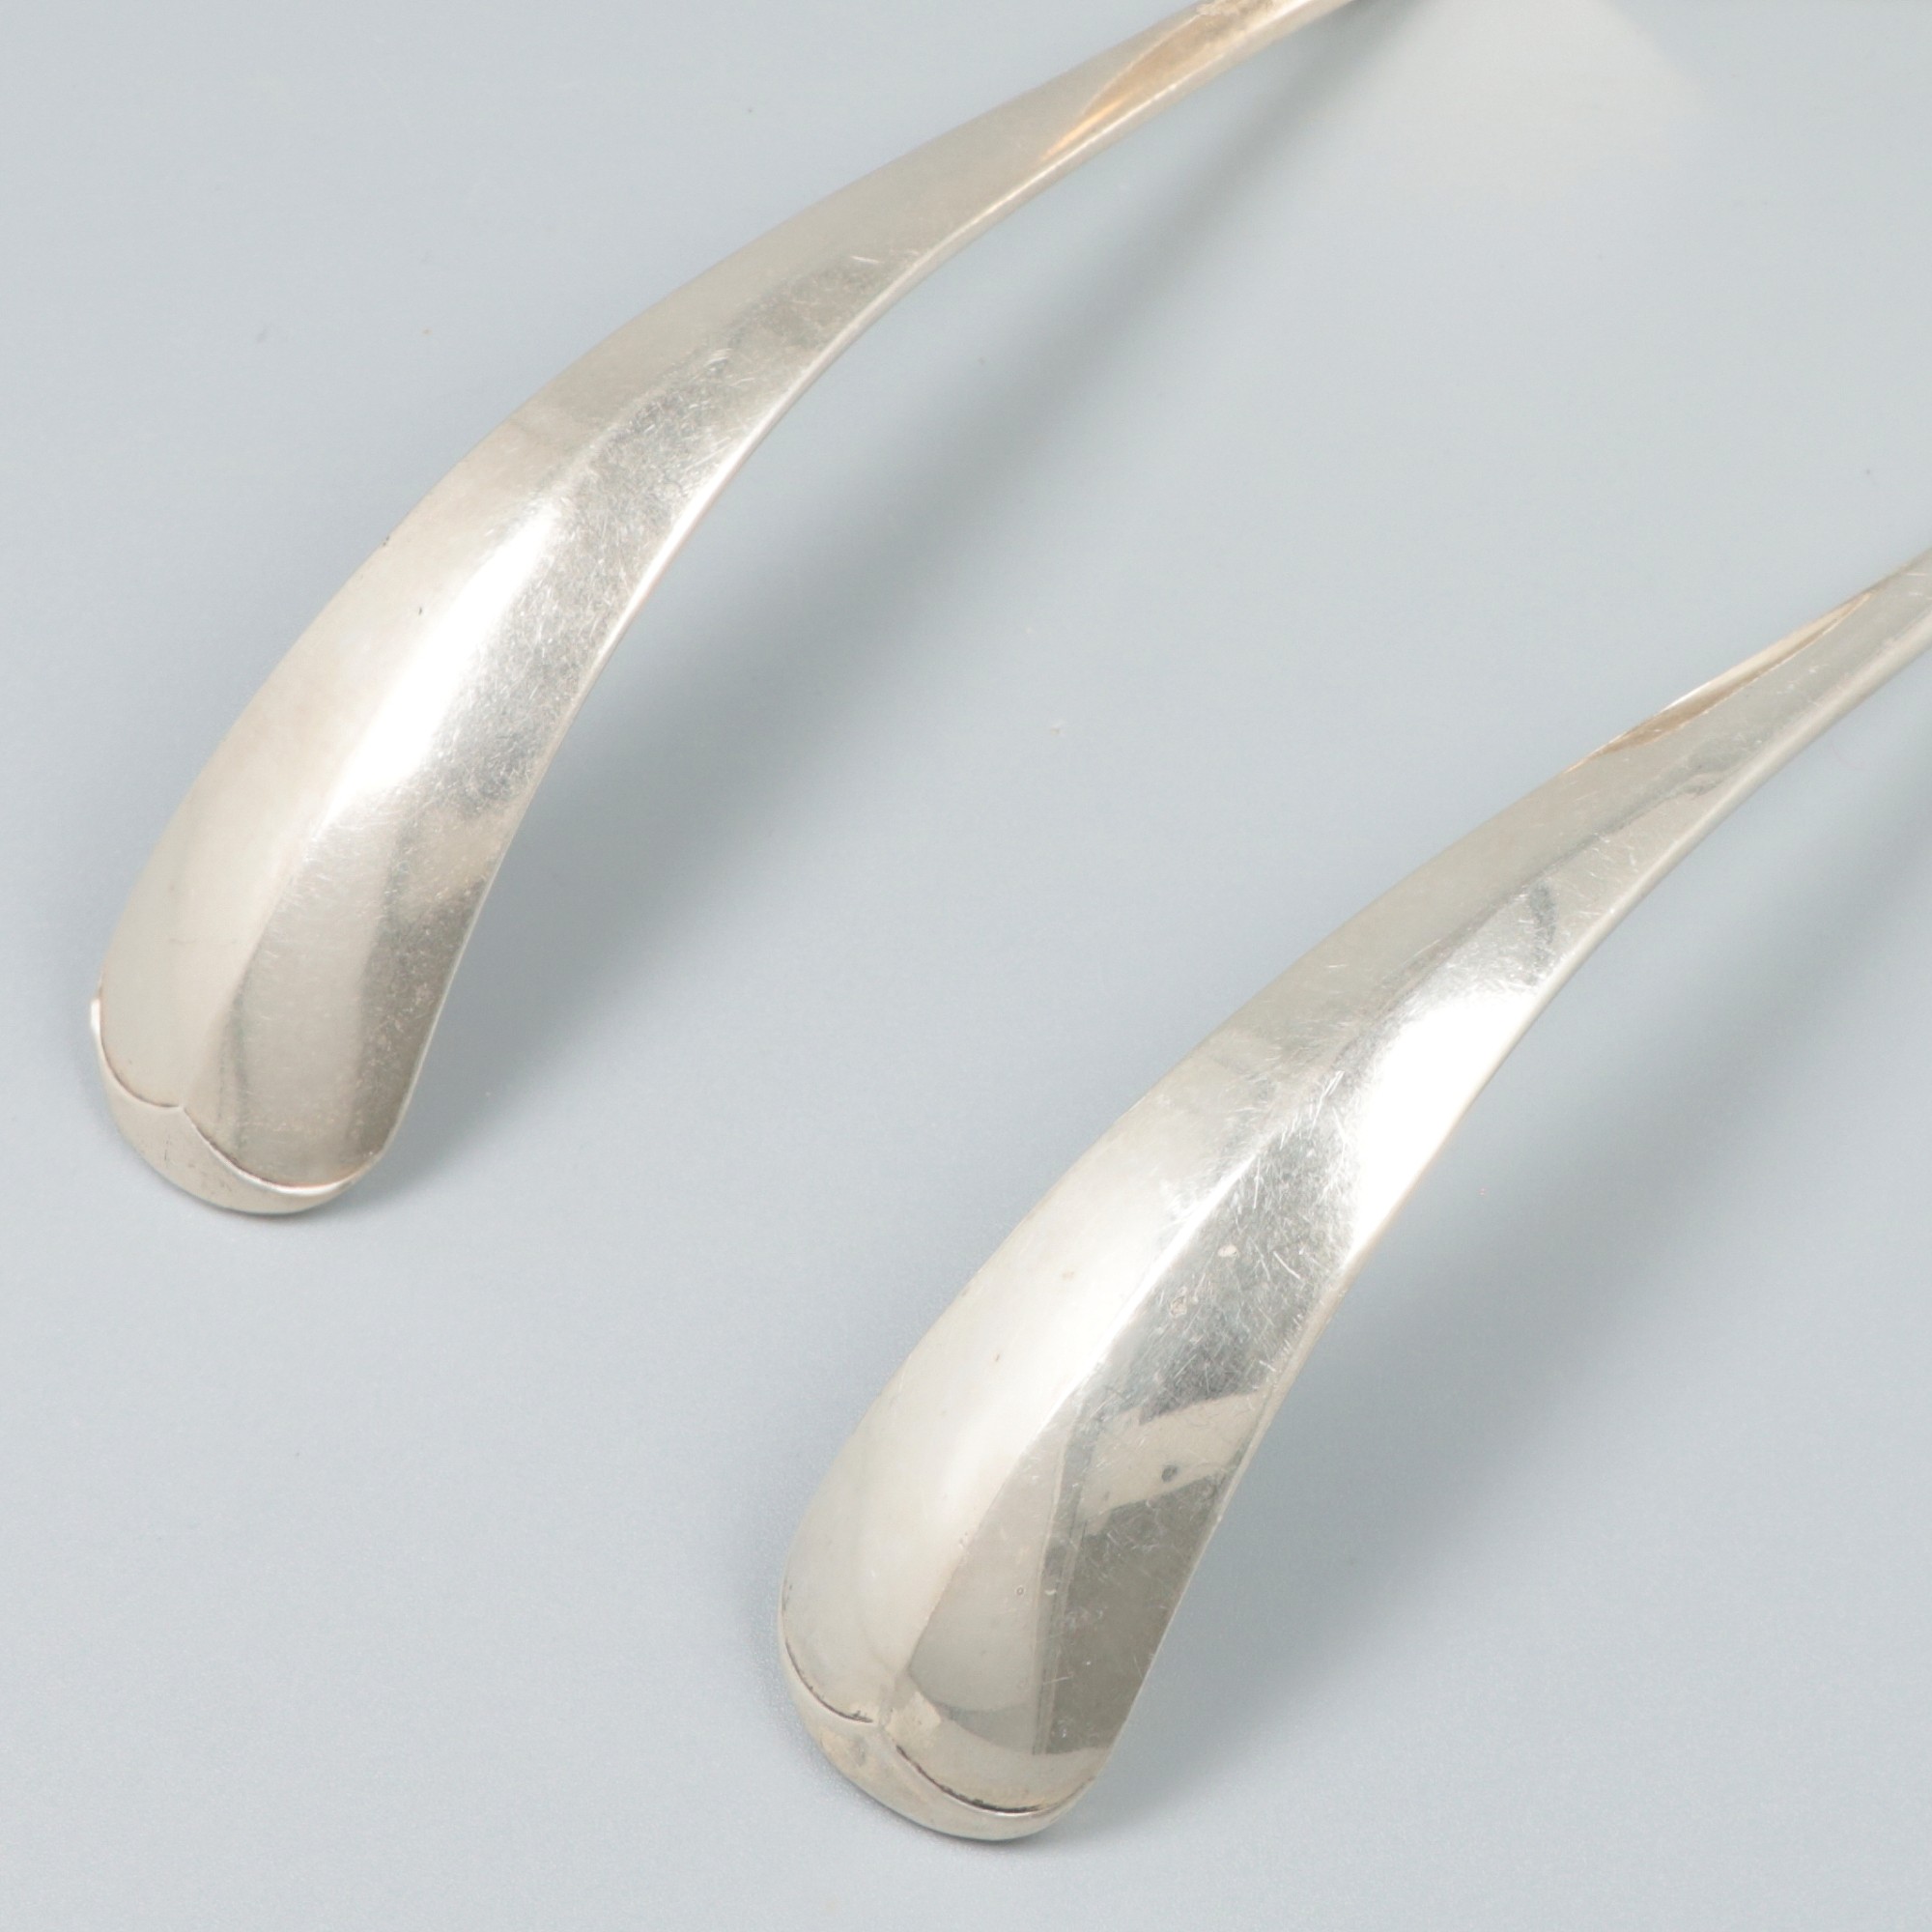 Sauce spoon & compote spoon "Haags Lofje", silver. - Image 3 of 5